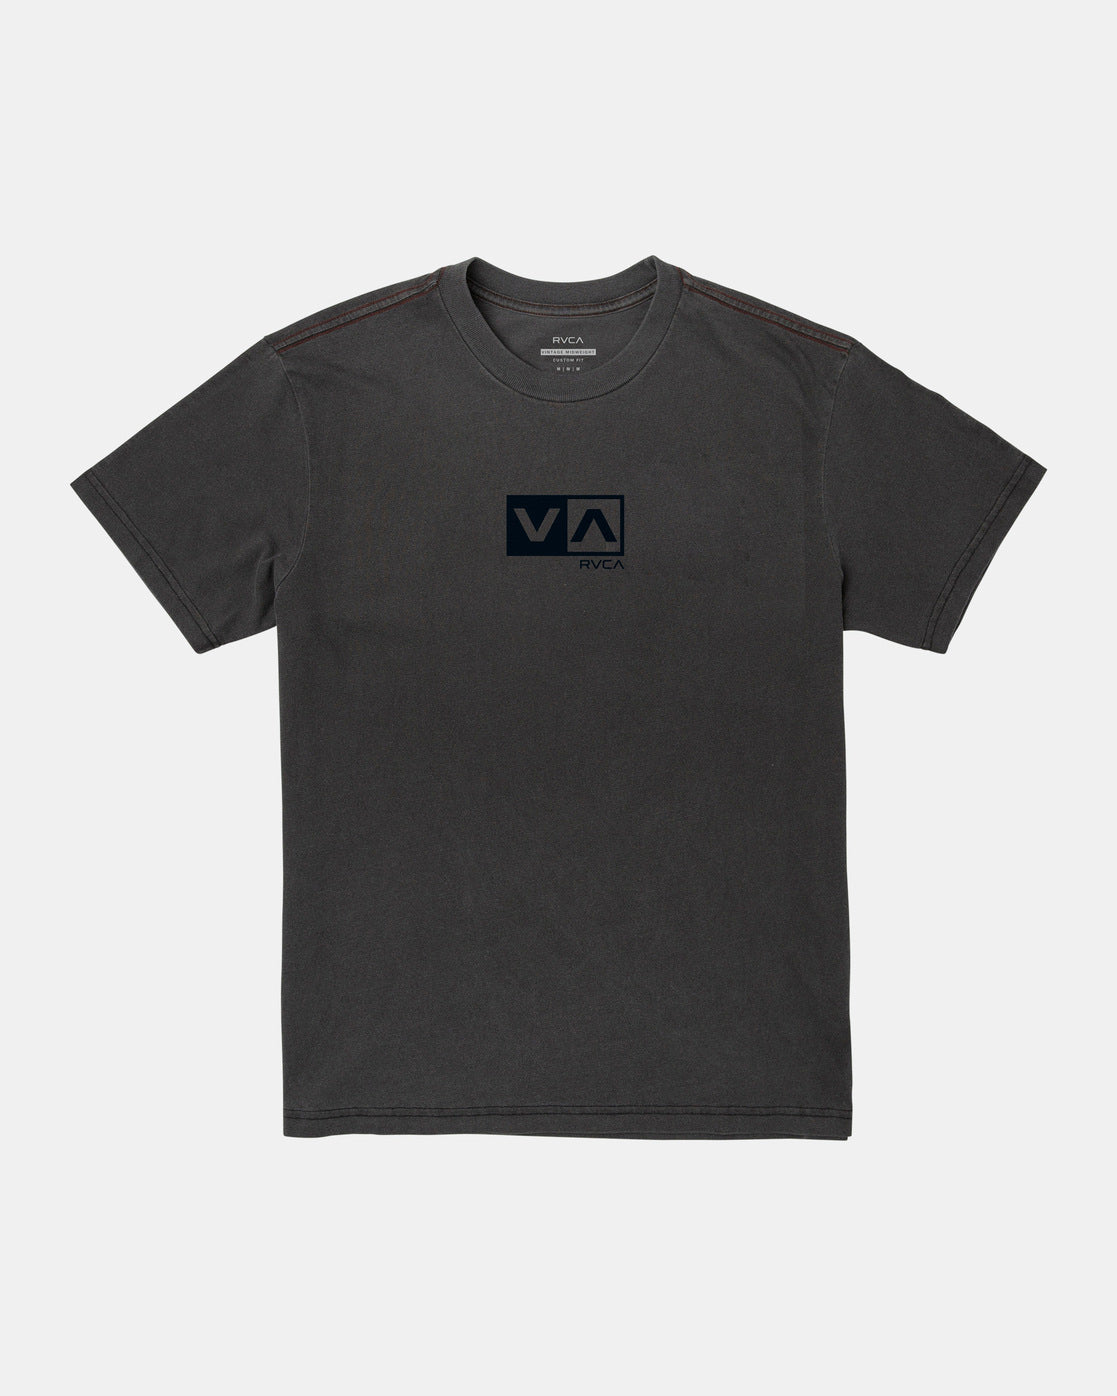 Load image into Gallery viewer, RVCA Balance Flock T-Shirt - Black
